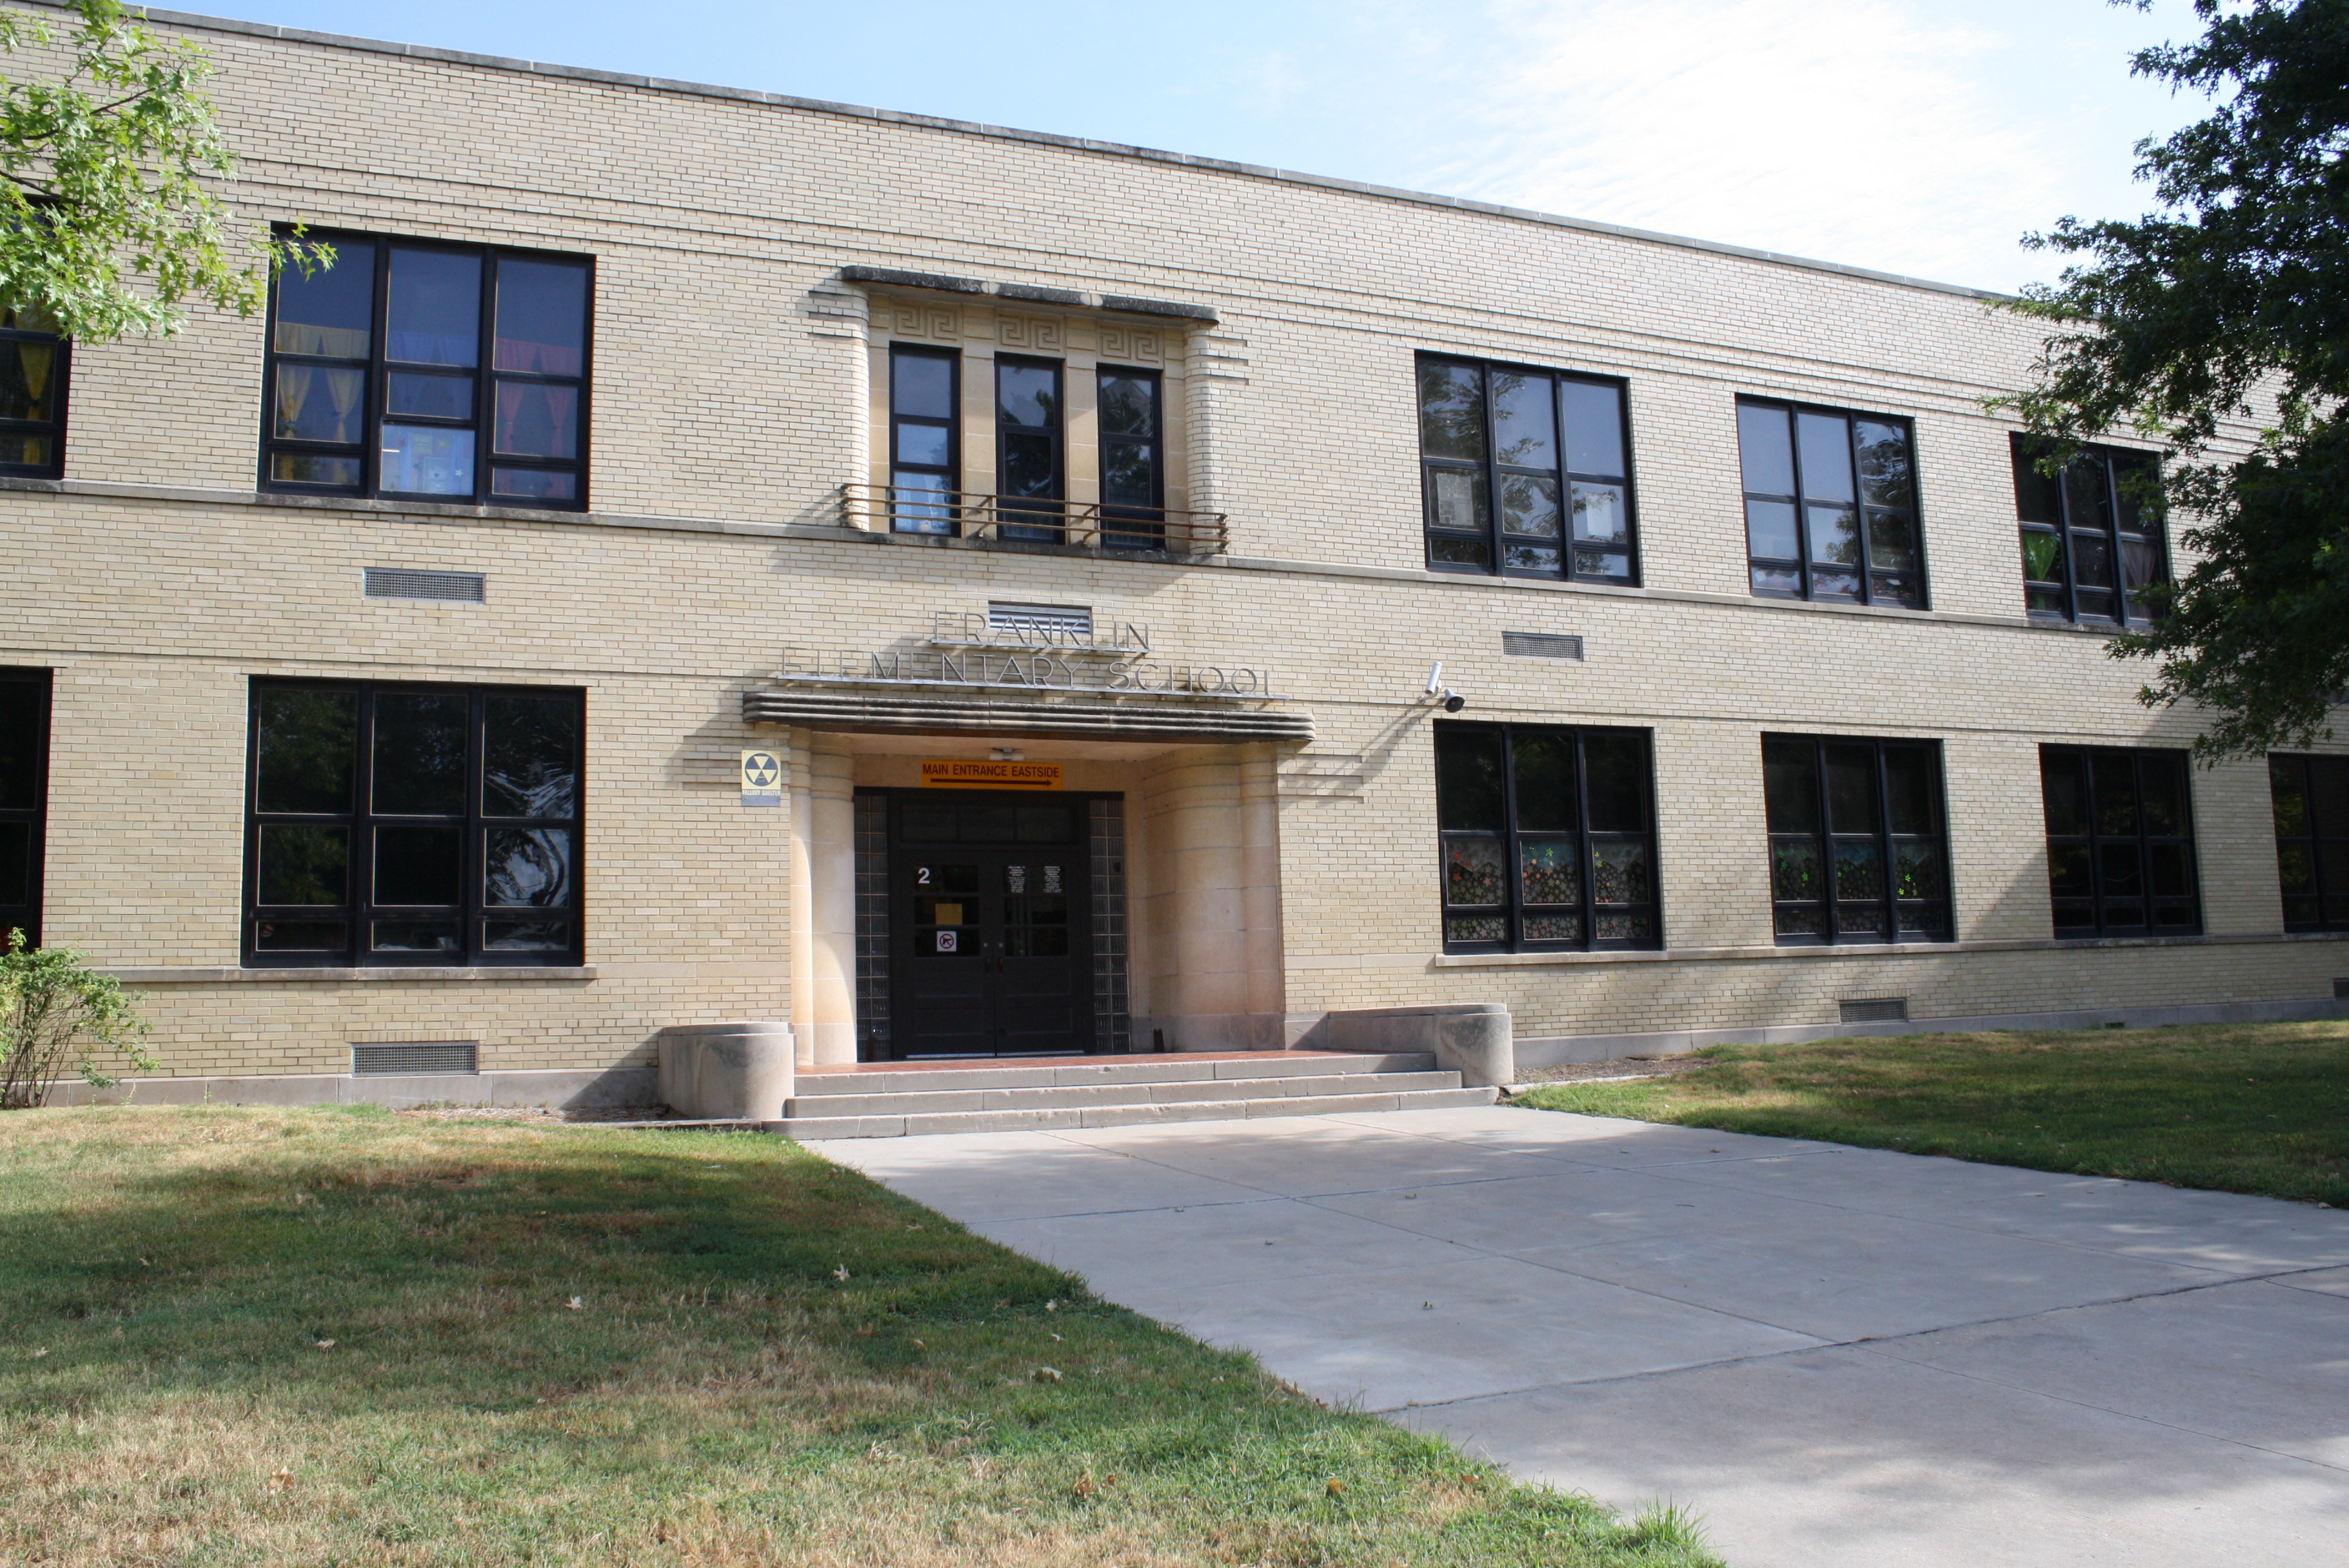 Image of the front of Franklin Elementary School